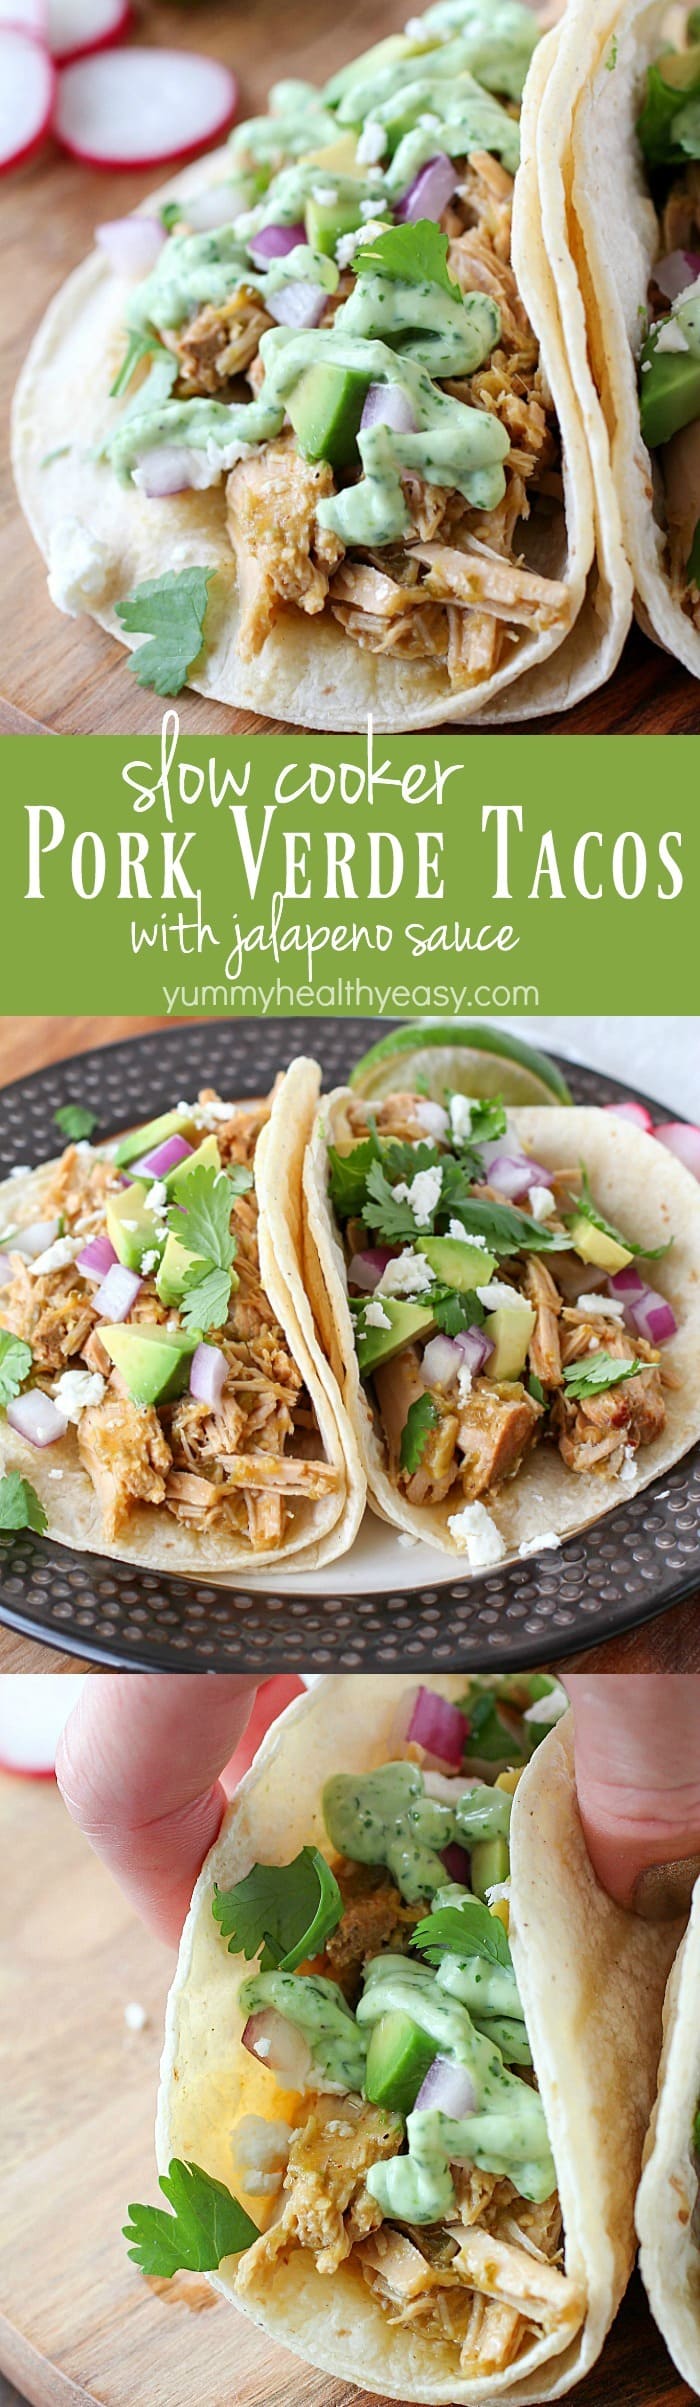 Pork Verde Tacos cooked in the crock pot and served with a drizzle of amazing jalapeño sauce. You will love the flavor in these pork tacos and love how easy they are to make! via @jennikolaus